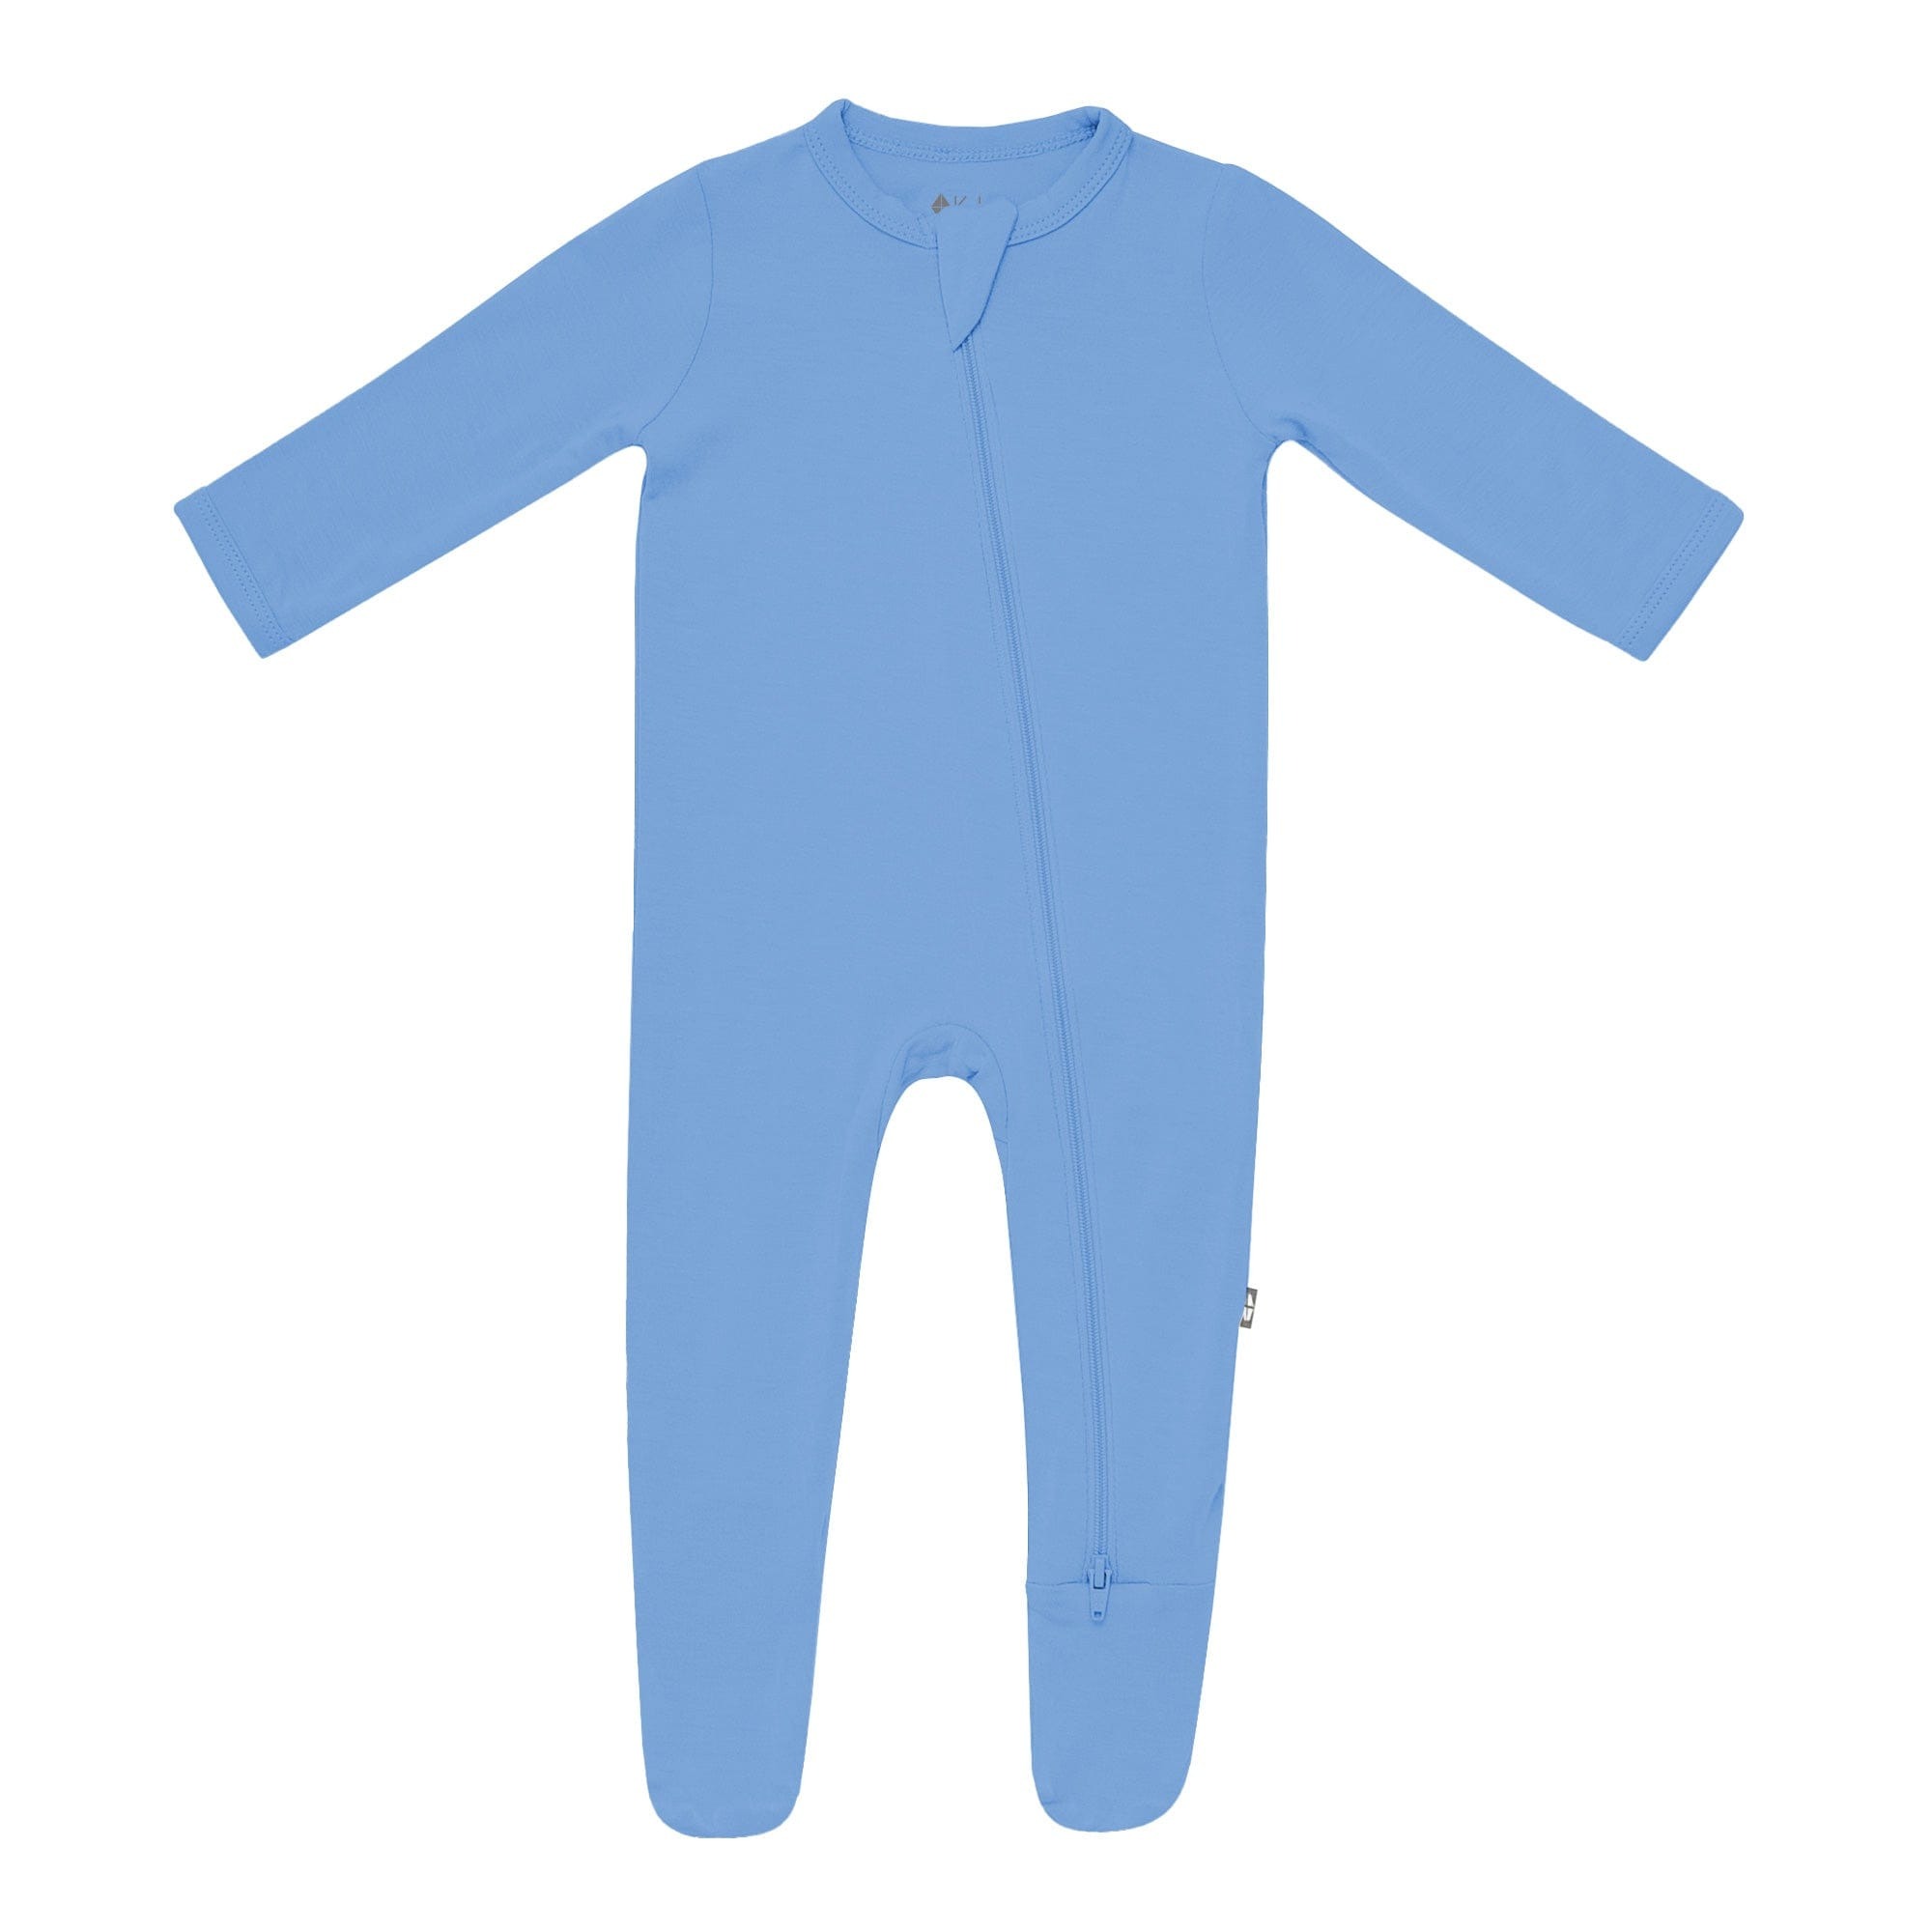 Kyte Baby Periwinkle Zippered Footie - 0-3 Months